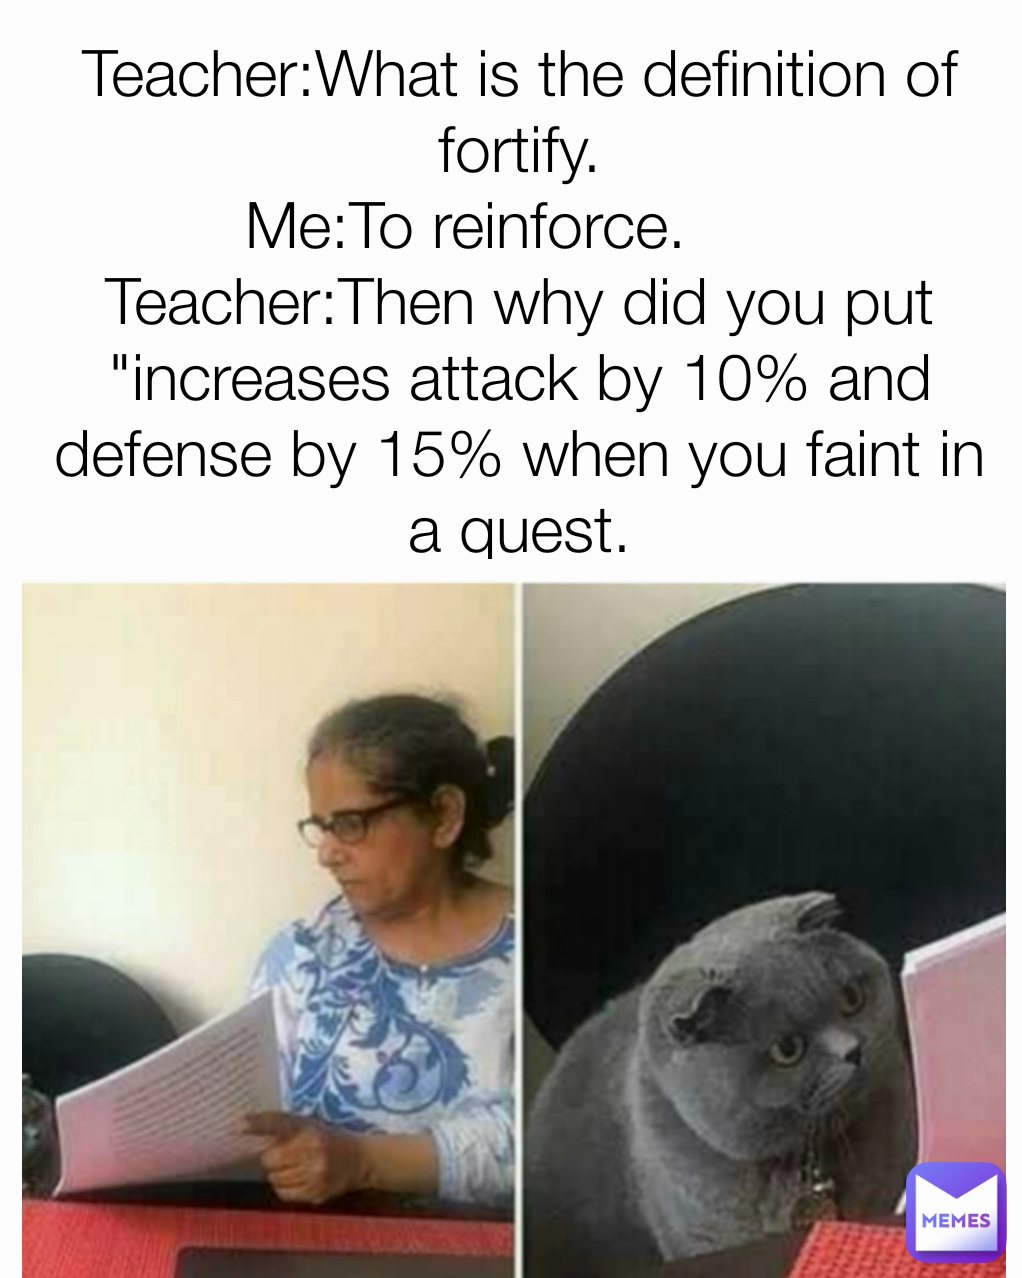 Teacher:What is the definition of fortify.
Me:To reinforce.      
Teacher:Then why did you put "increases attack by 10% and defense by 15% when you faint in a quest.
